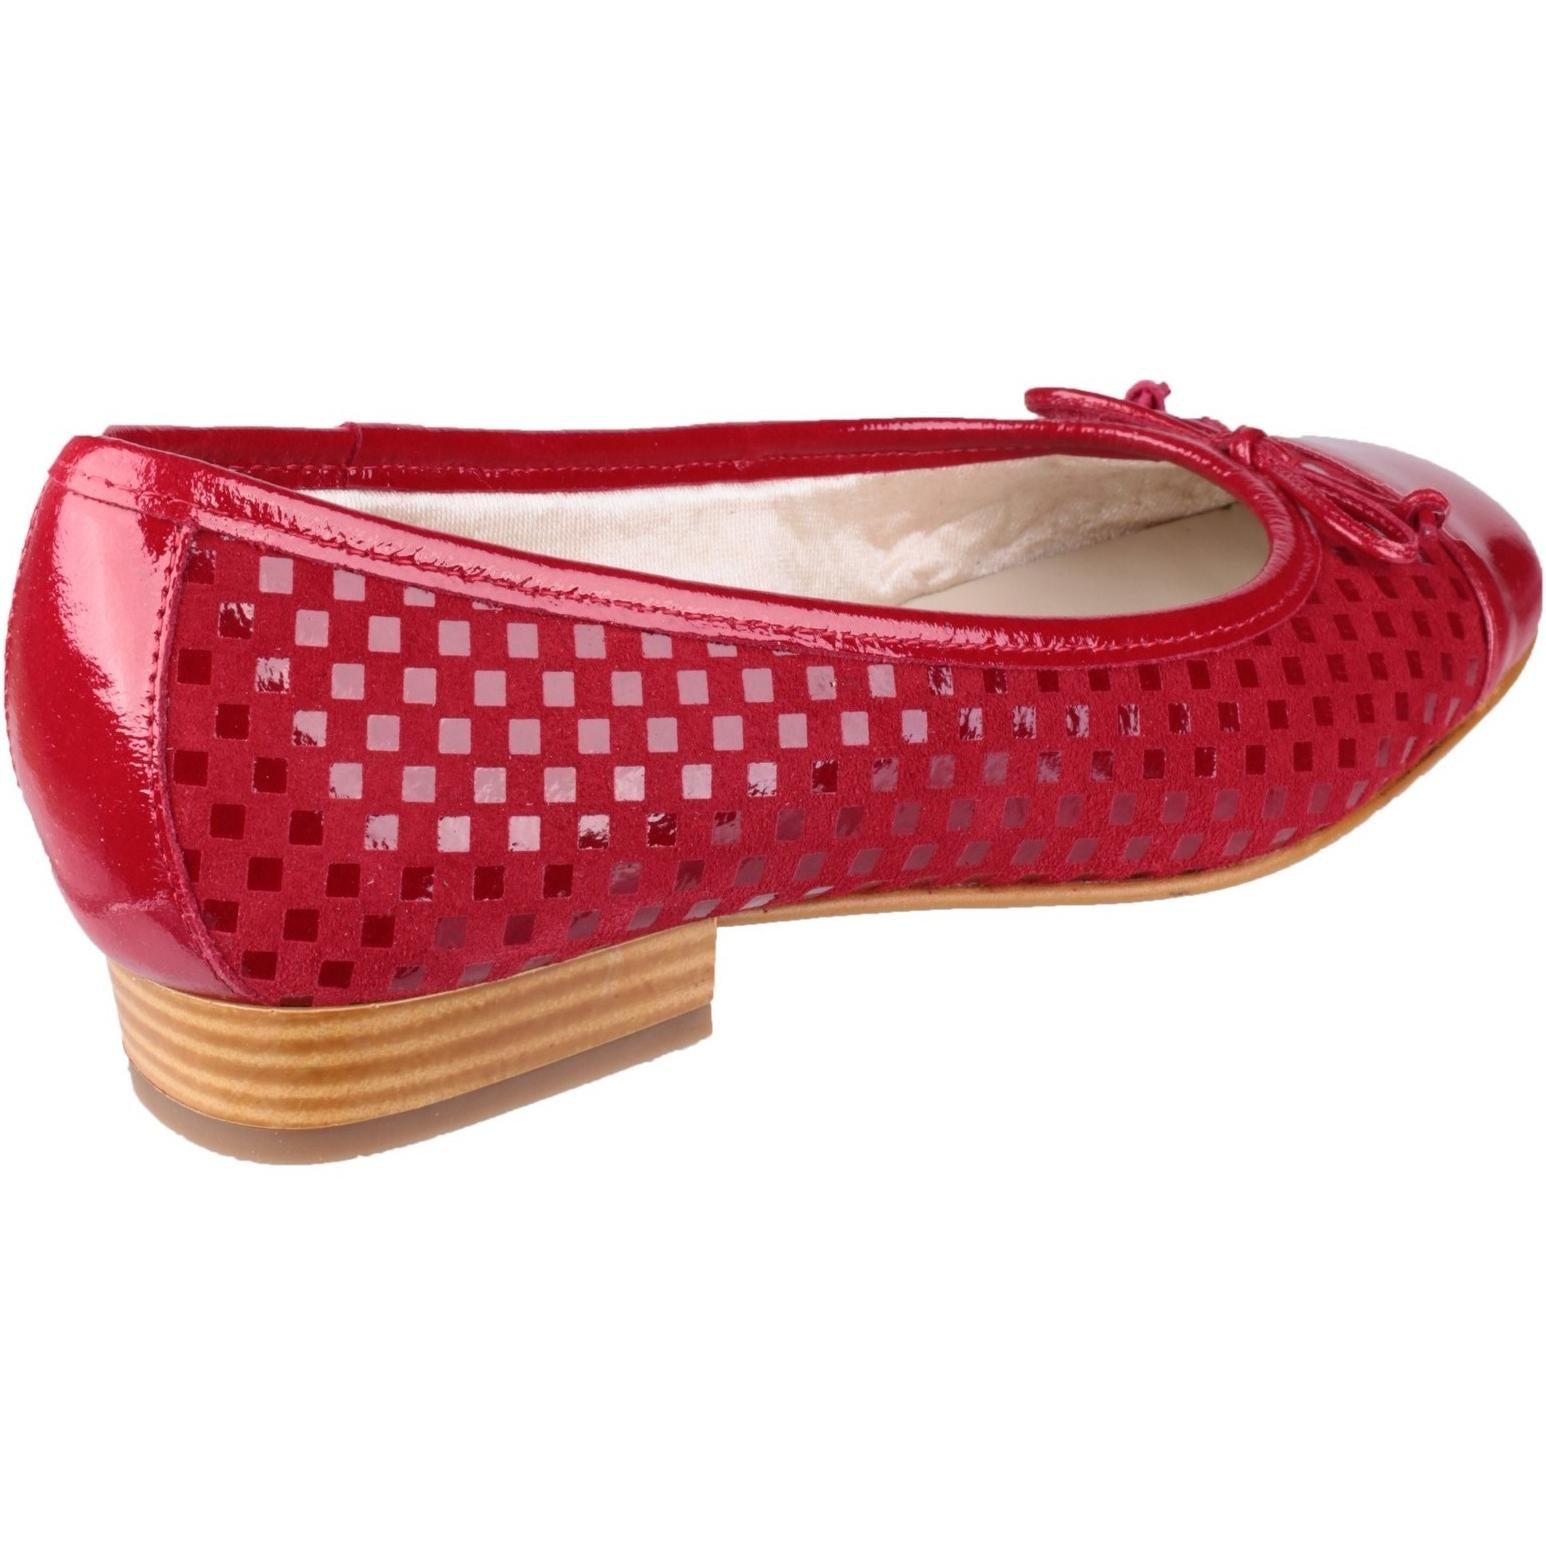 Riva Andros Patent/Suede women's Ballerina Flats